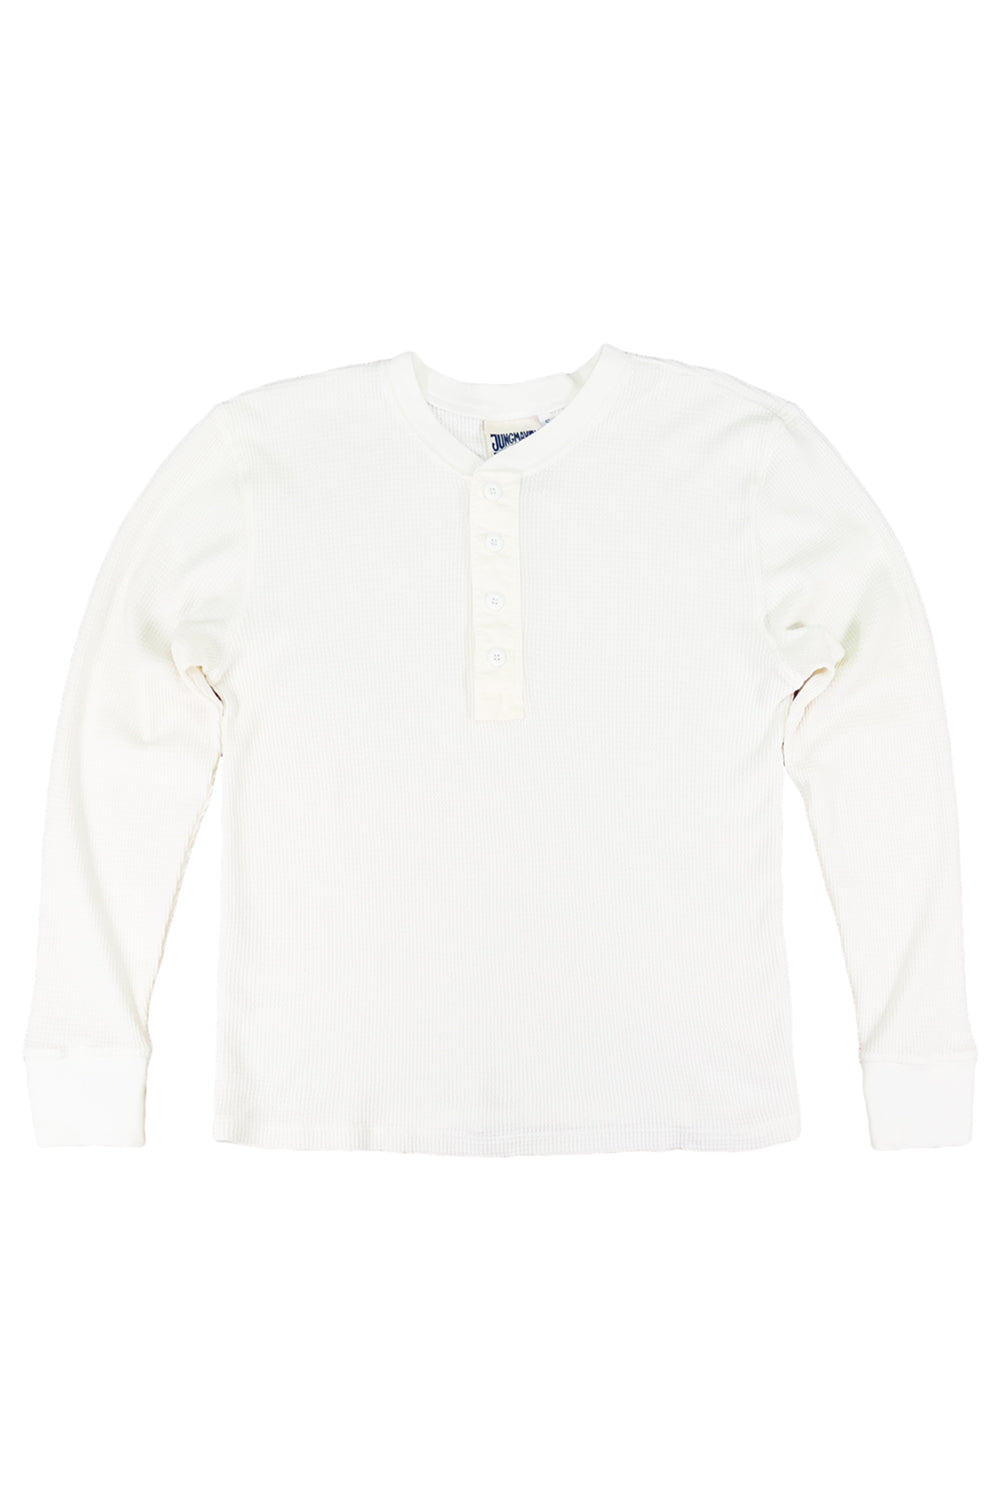 Thermal Mountain Henley | Jungmaven Hemp Clothing & Accessories / Color: Washed White